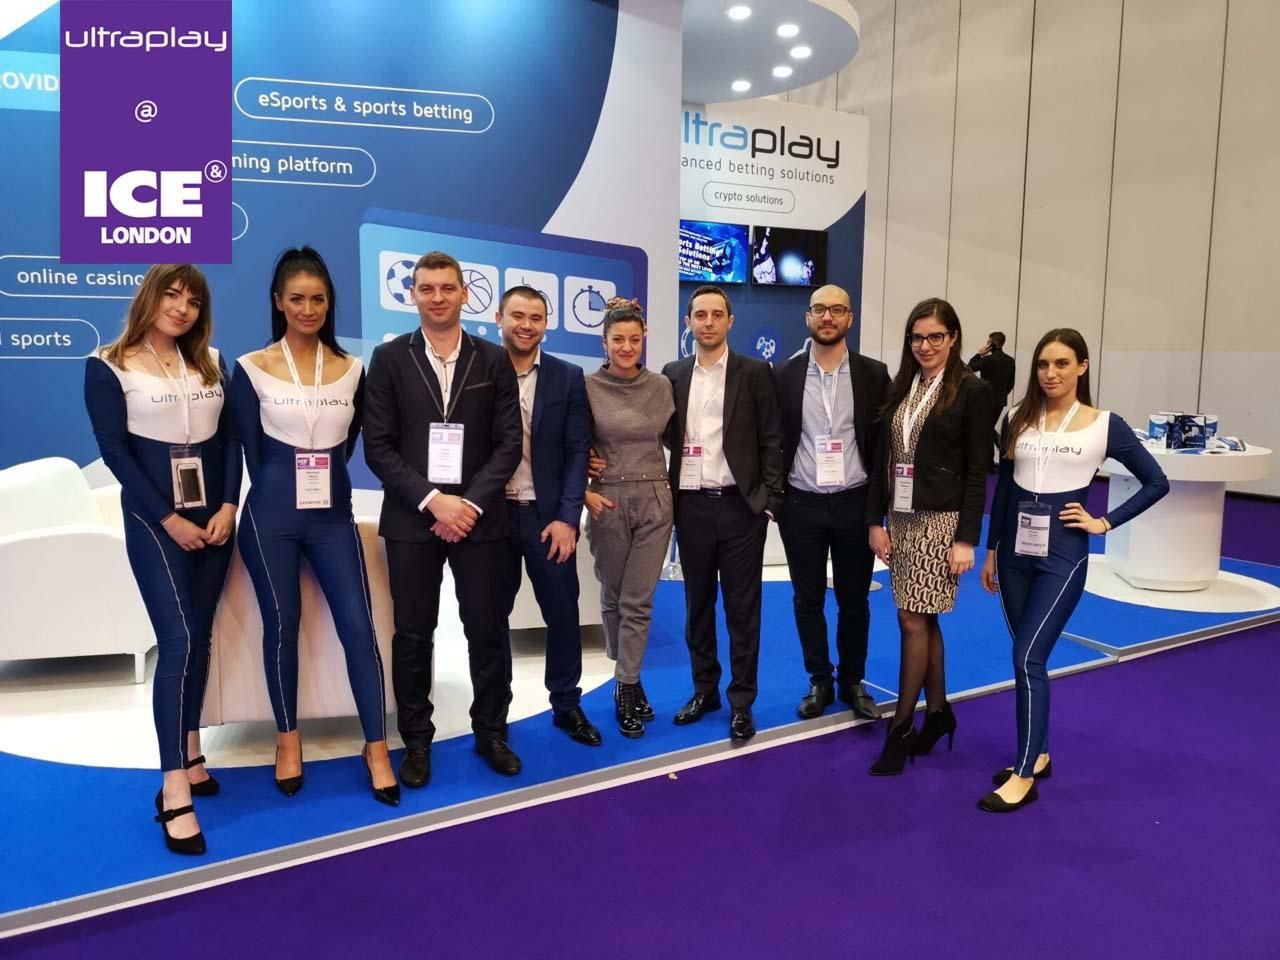 UltraPlay at ICE London 2019